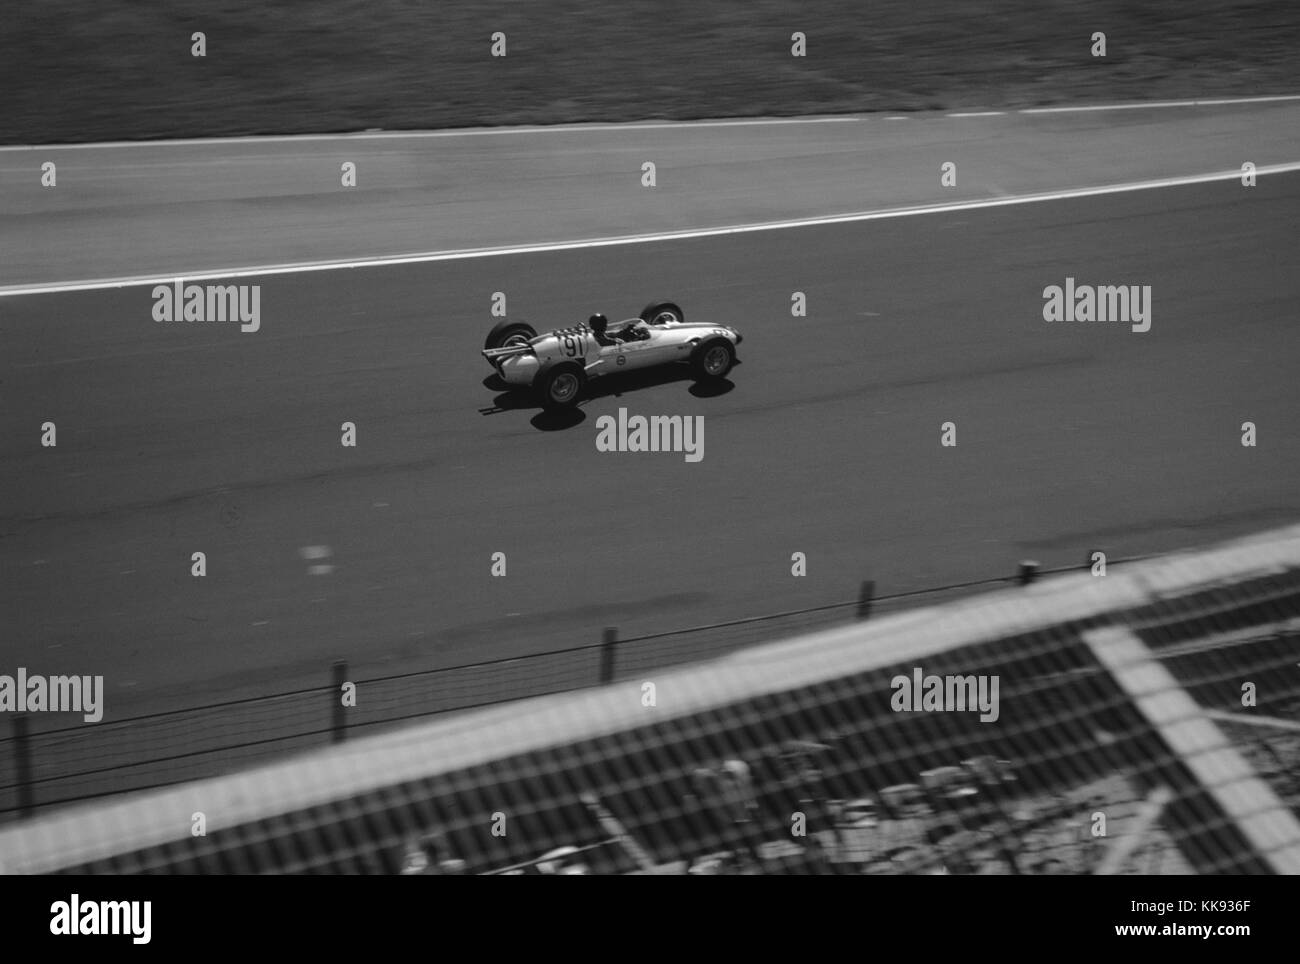 Race car driver Dan Gurney driving car 91, a Lotus powered by a Ford engine, during a qualifying lap for the Indianapolis 500 race at Indianapolis Motor Speedway, Indianapolis, Indiana, May 30, 1963. Stock Photo